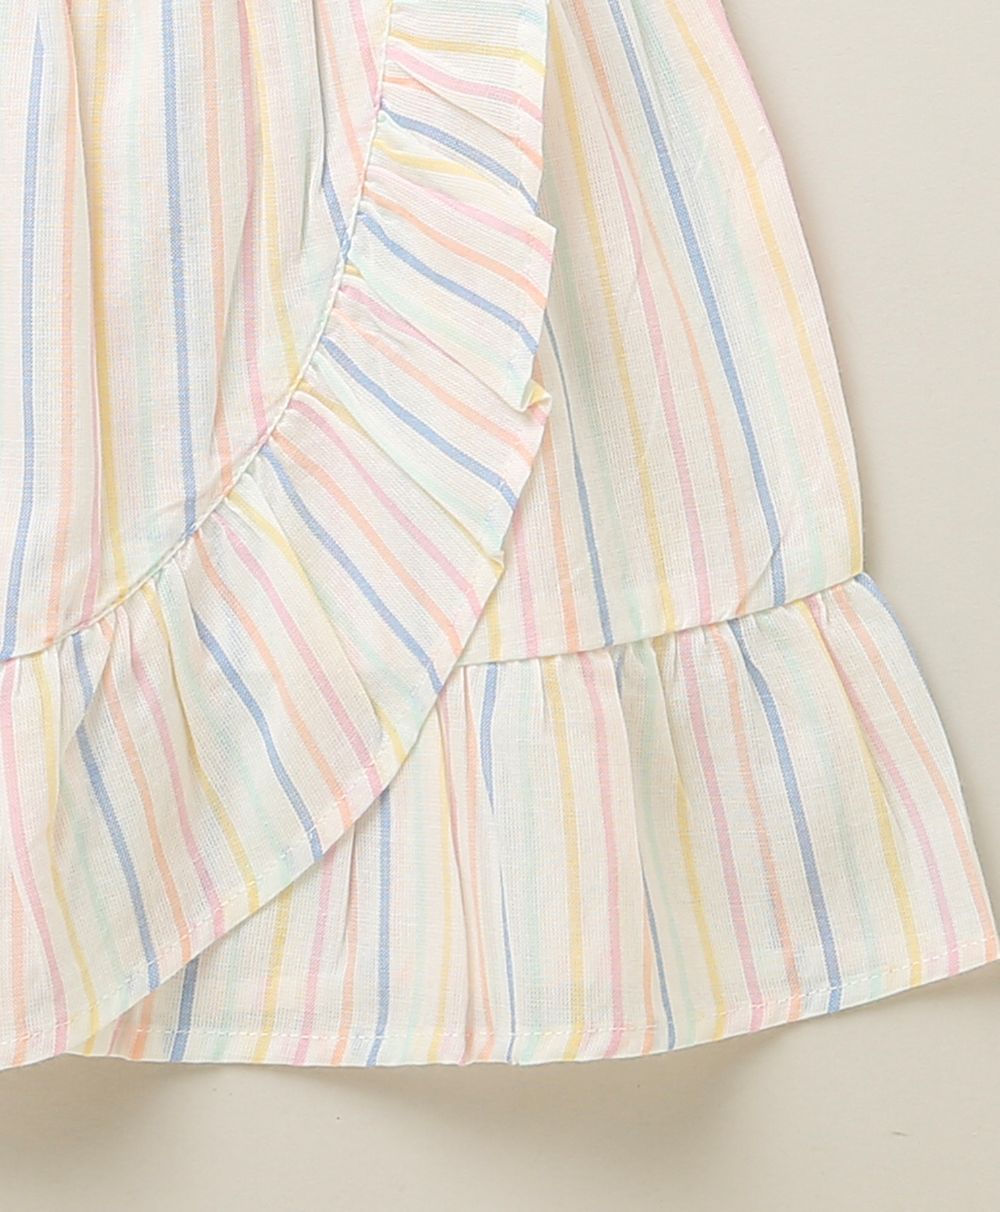 Multicoloured Striped Top with a Bloomer